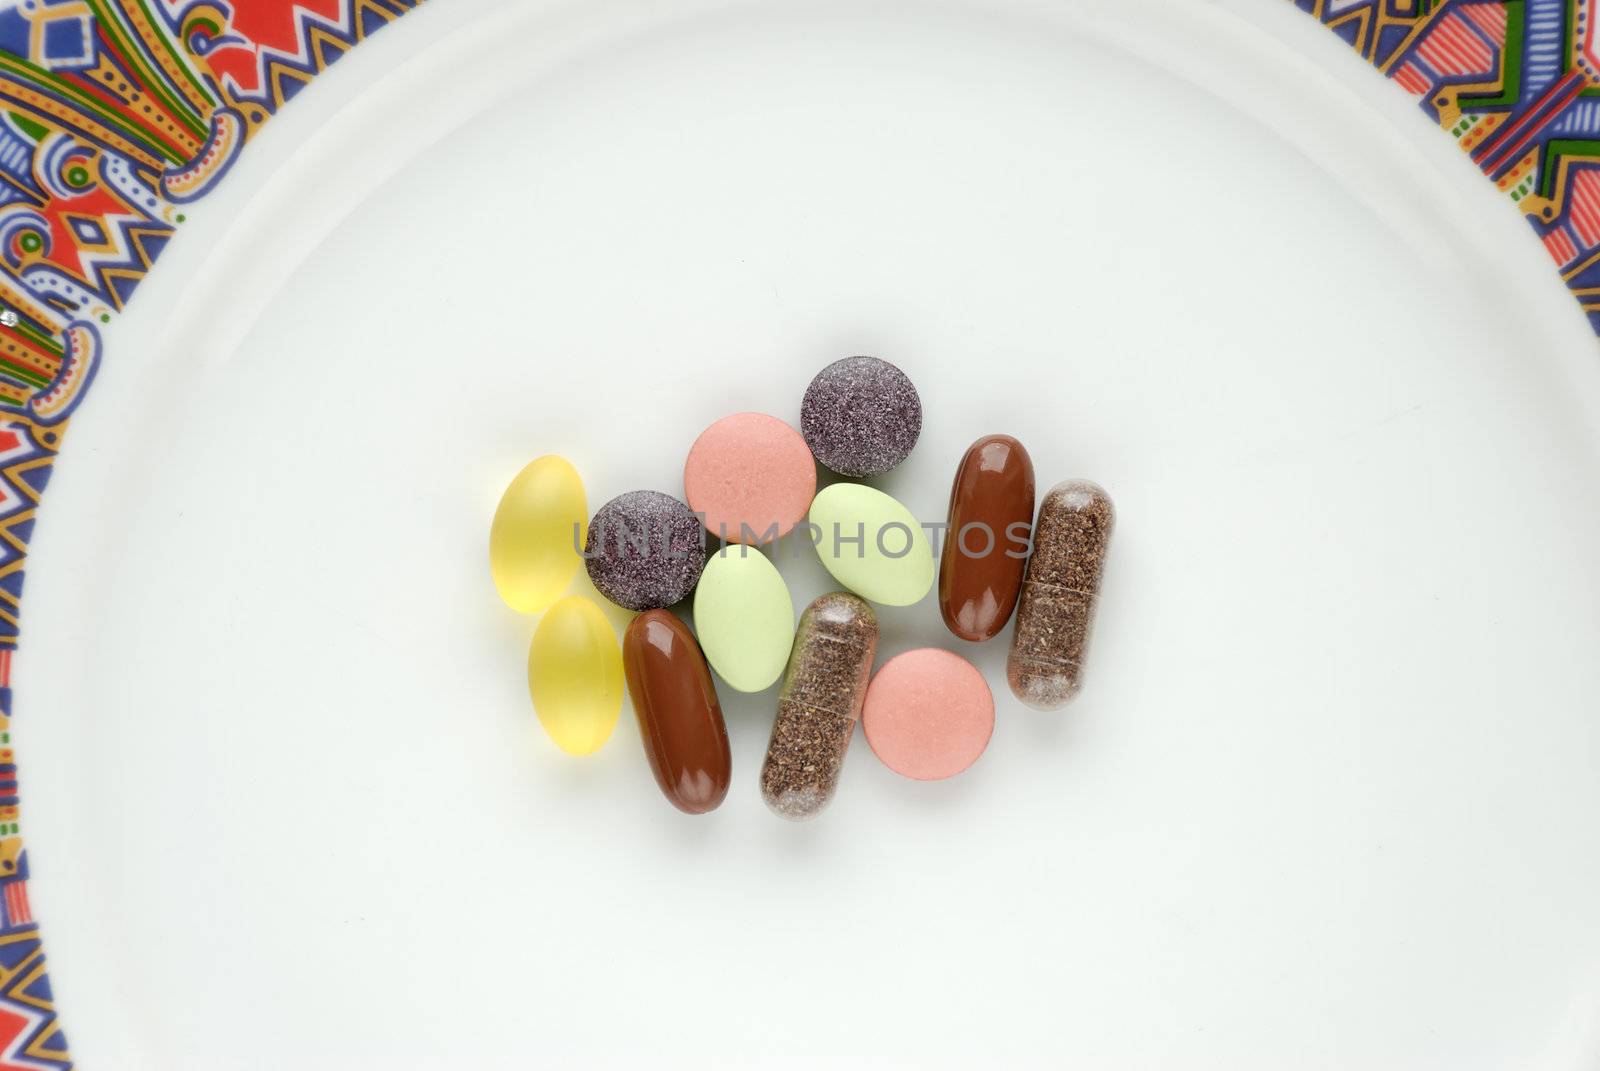 A dose of vitamins and minerals on a plate. Seen from above.
